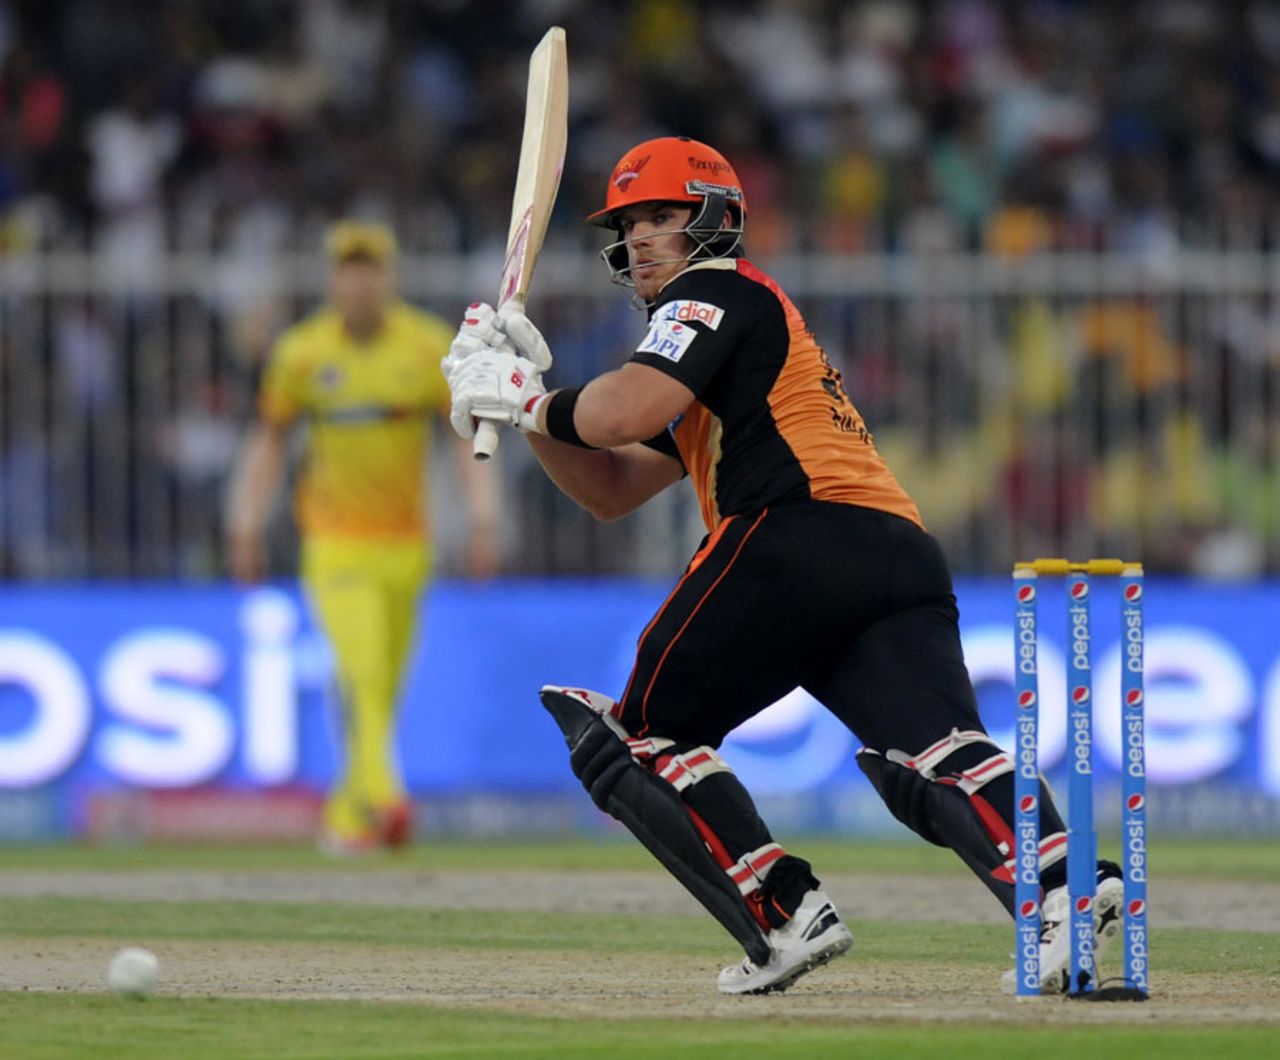 Aaron Finch top scored with 44, Sunrisers Hyderabad v Chennai Super Kings, IPL 2014, Sharjah, April 27, 2014